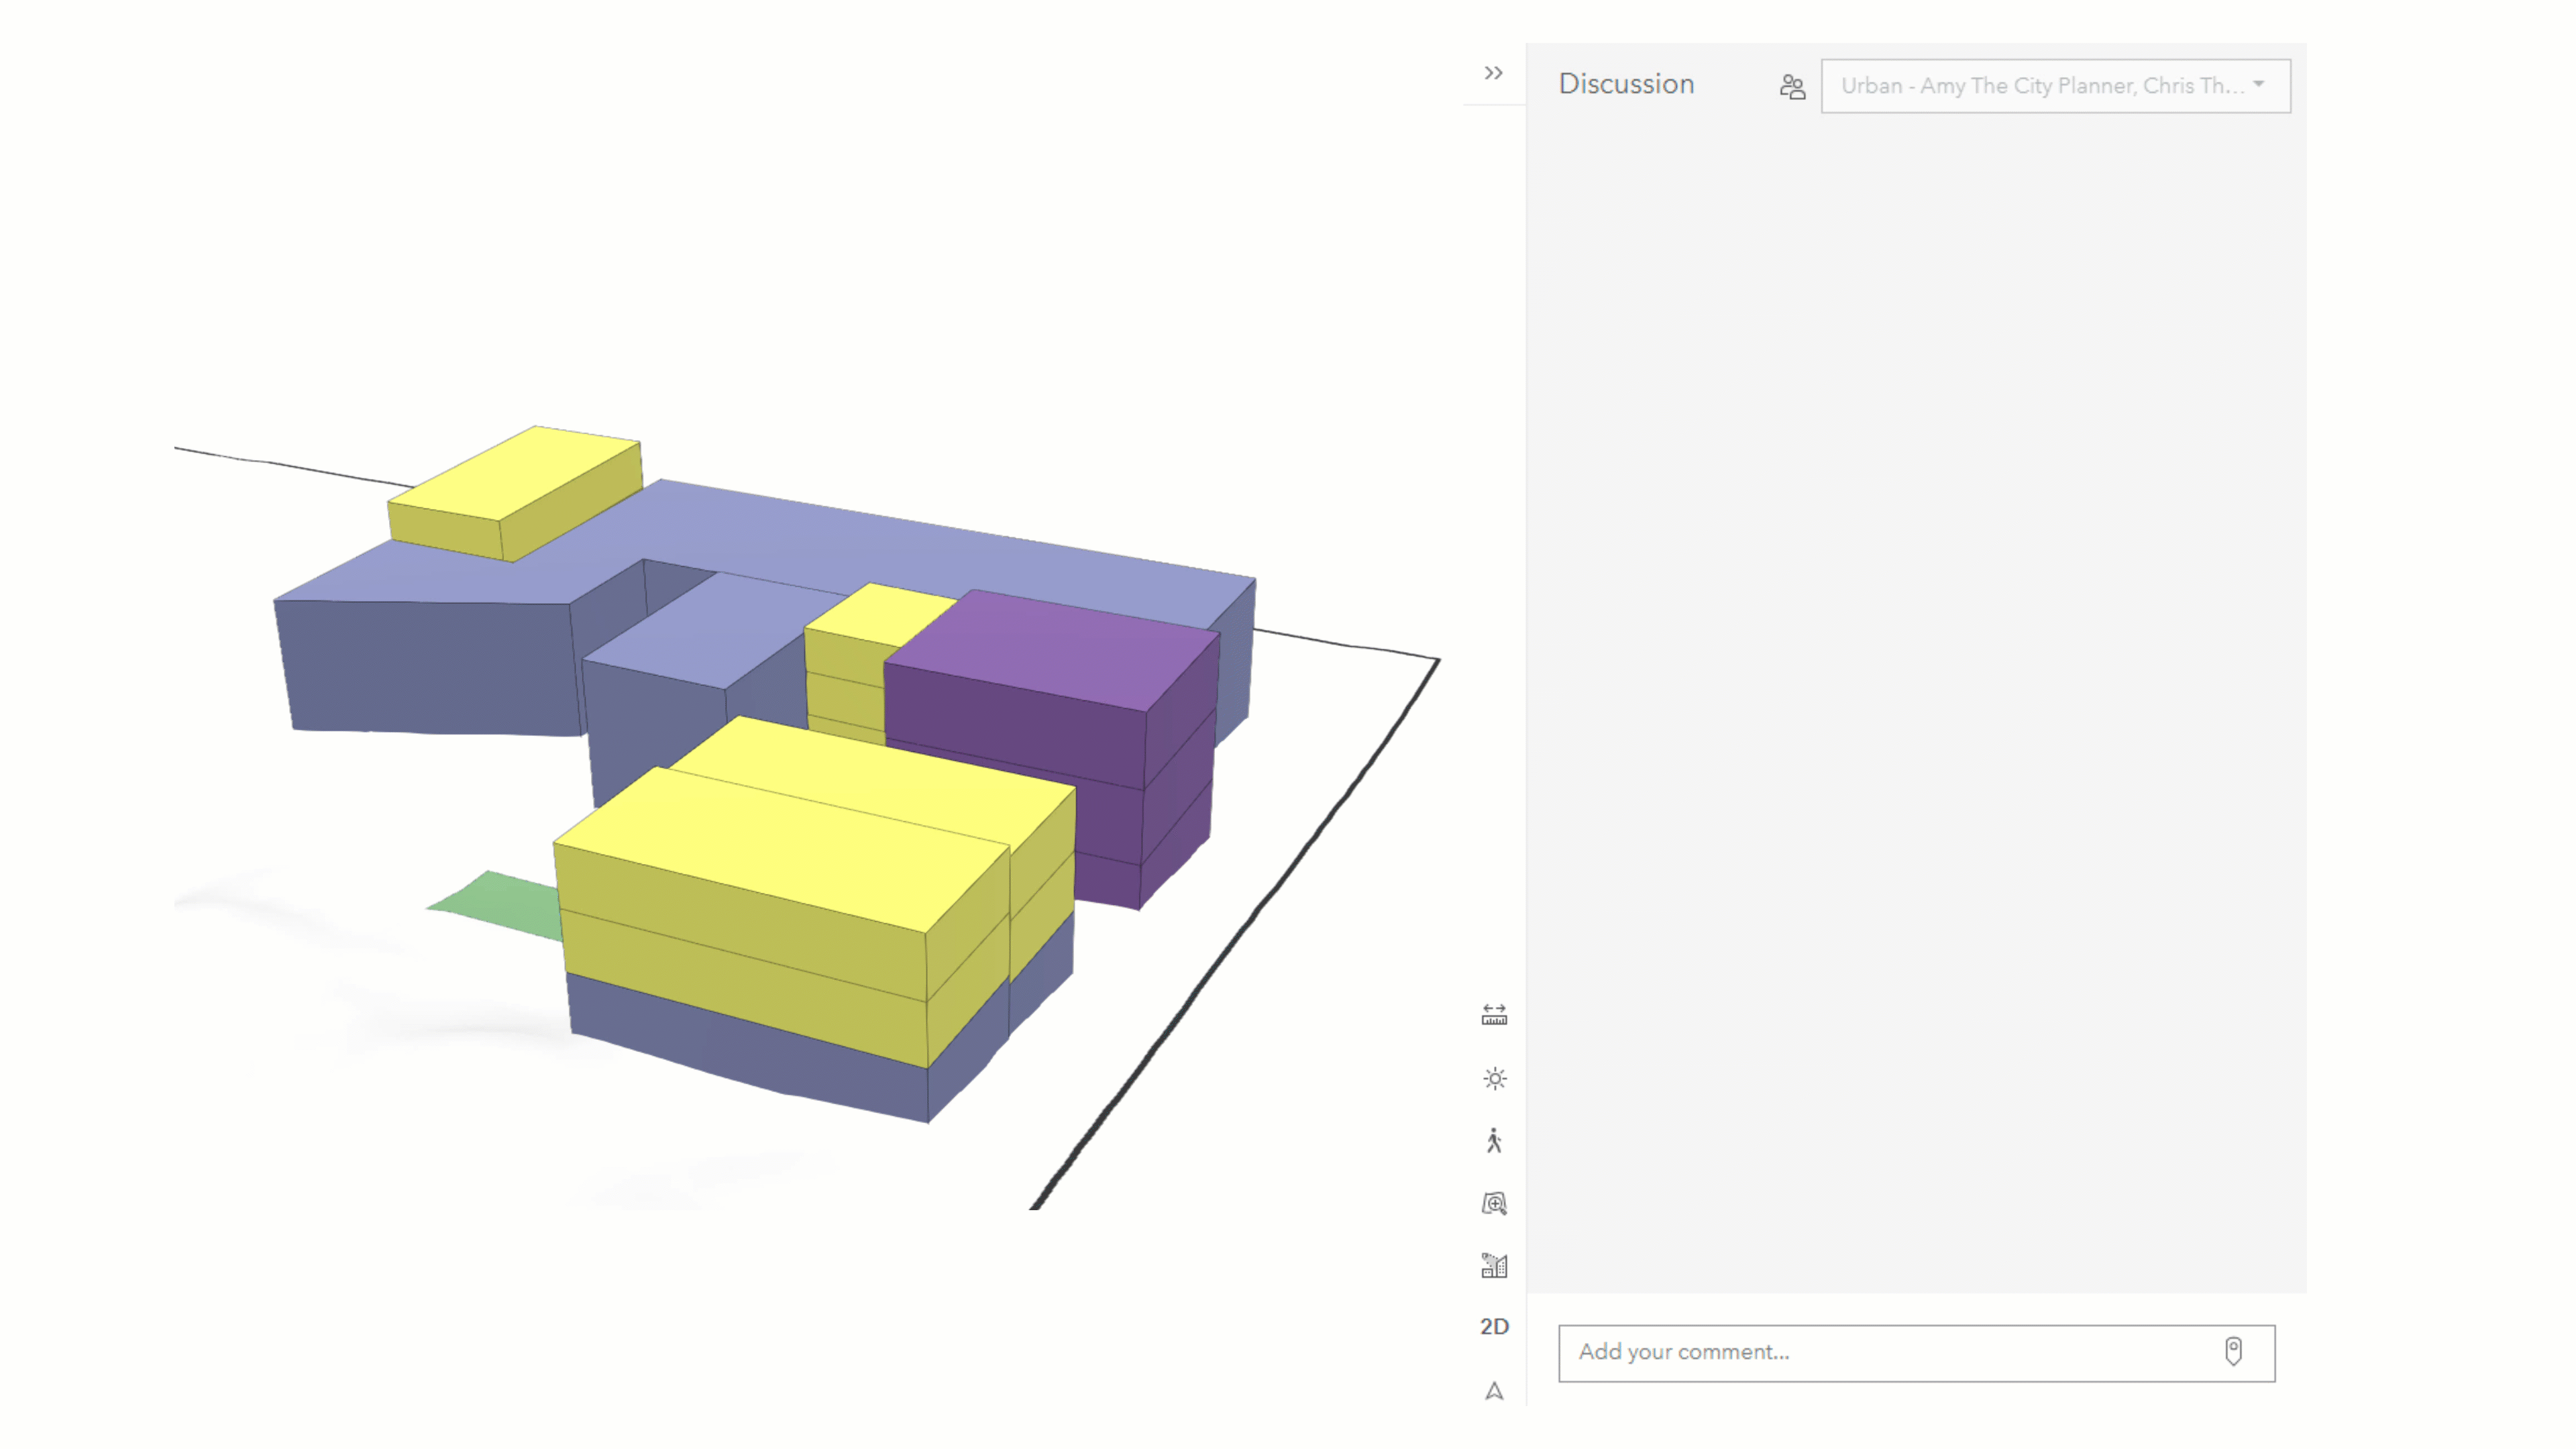 A GIF showing how to add comments to a 3D model with a yellow and purple 3D building and popup box with text